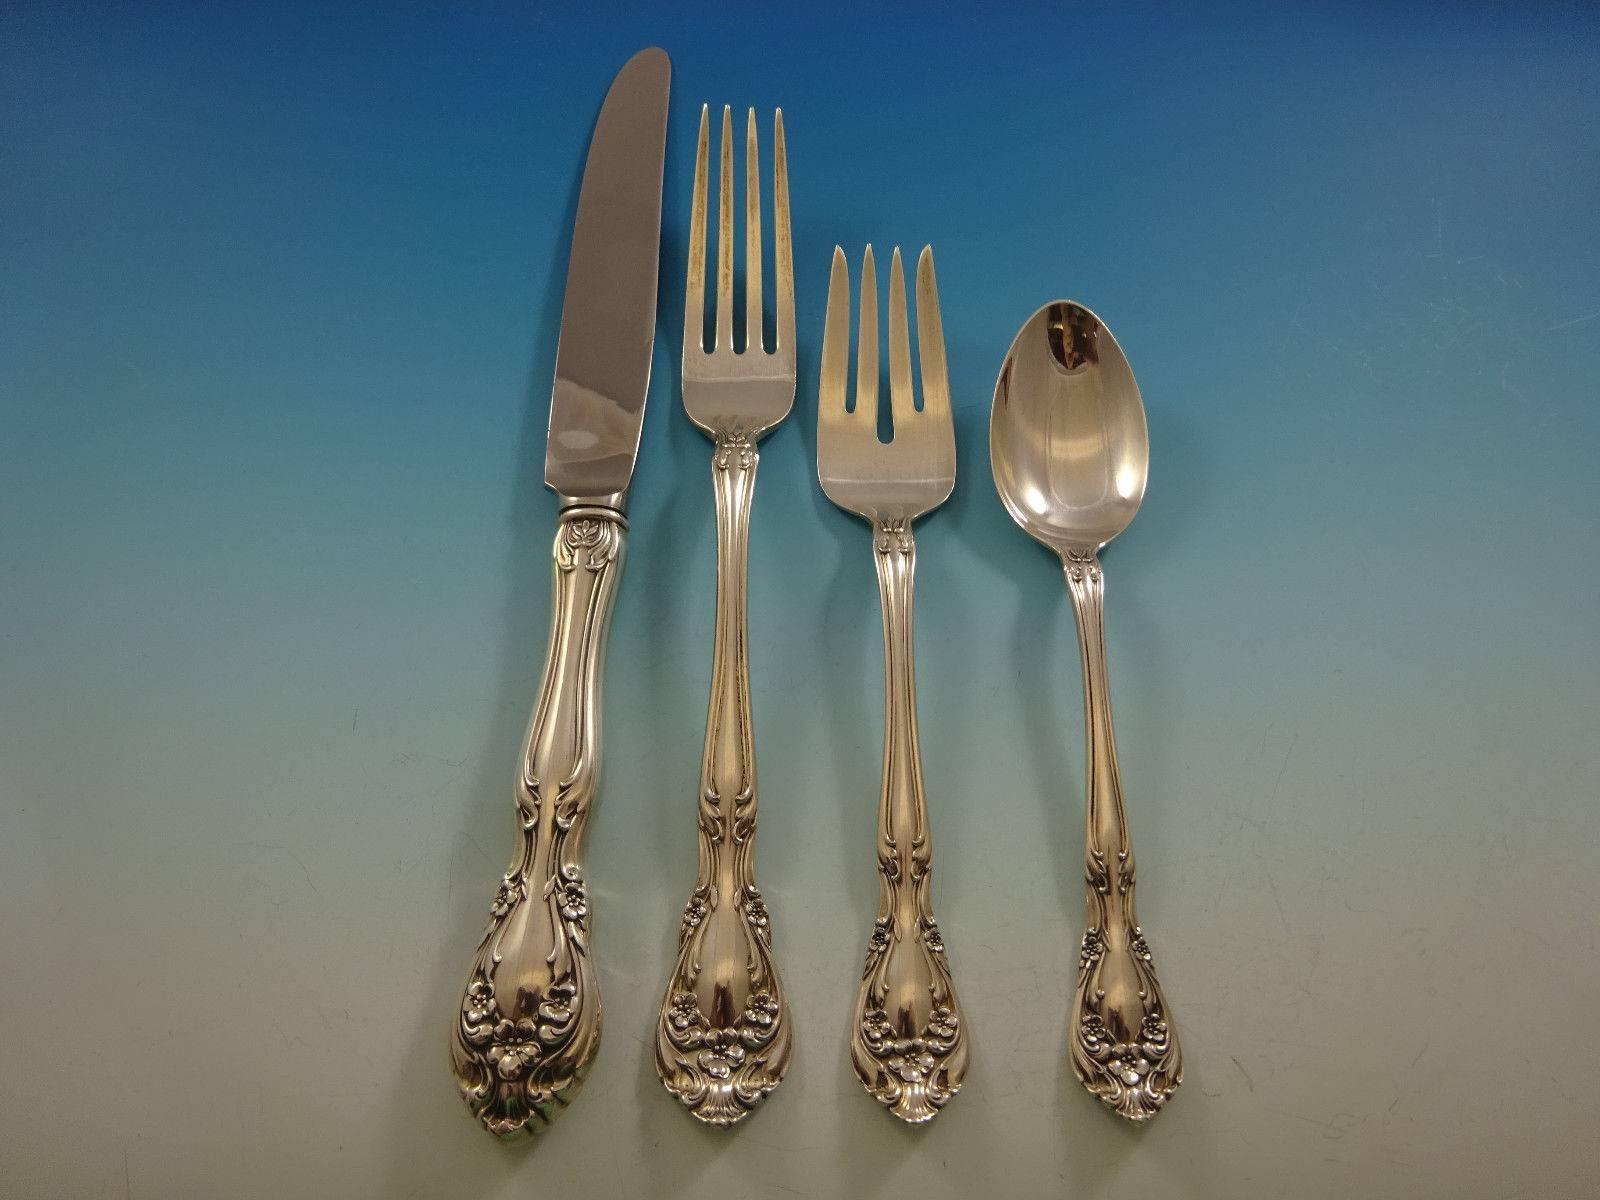 Chateau Rose by Alvin Sterling Silver Flatware Set of Eight Service 38 Pieces In Excellent Condition For Sale In Big Bend, WI